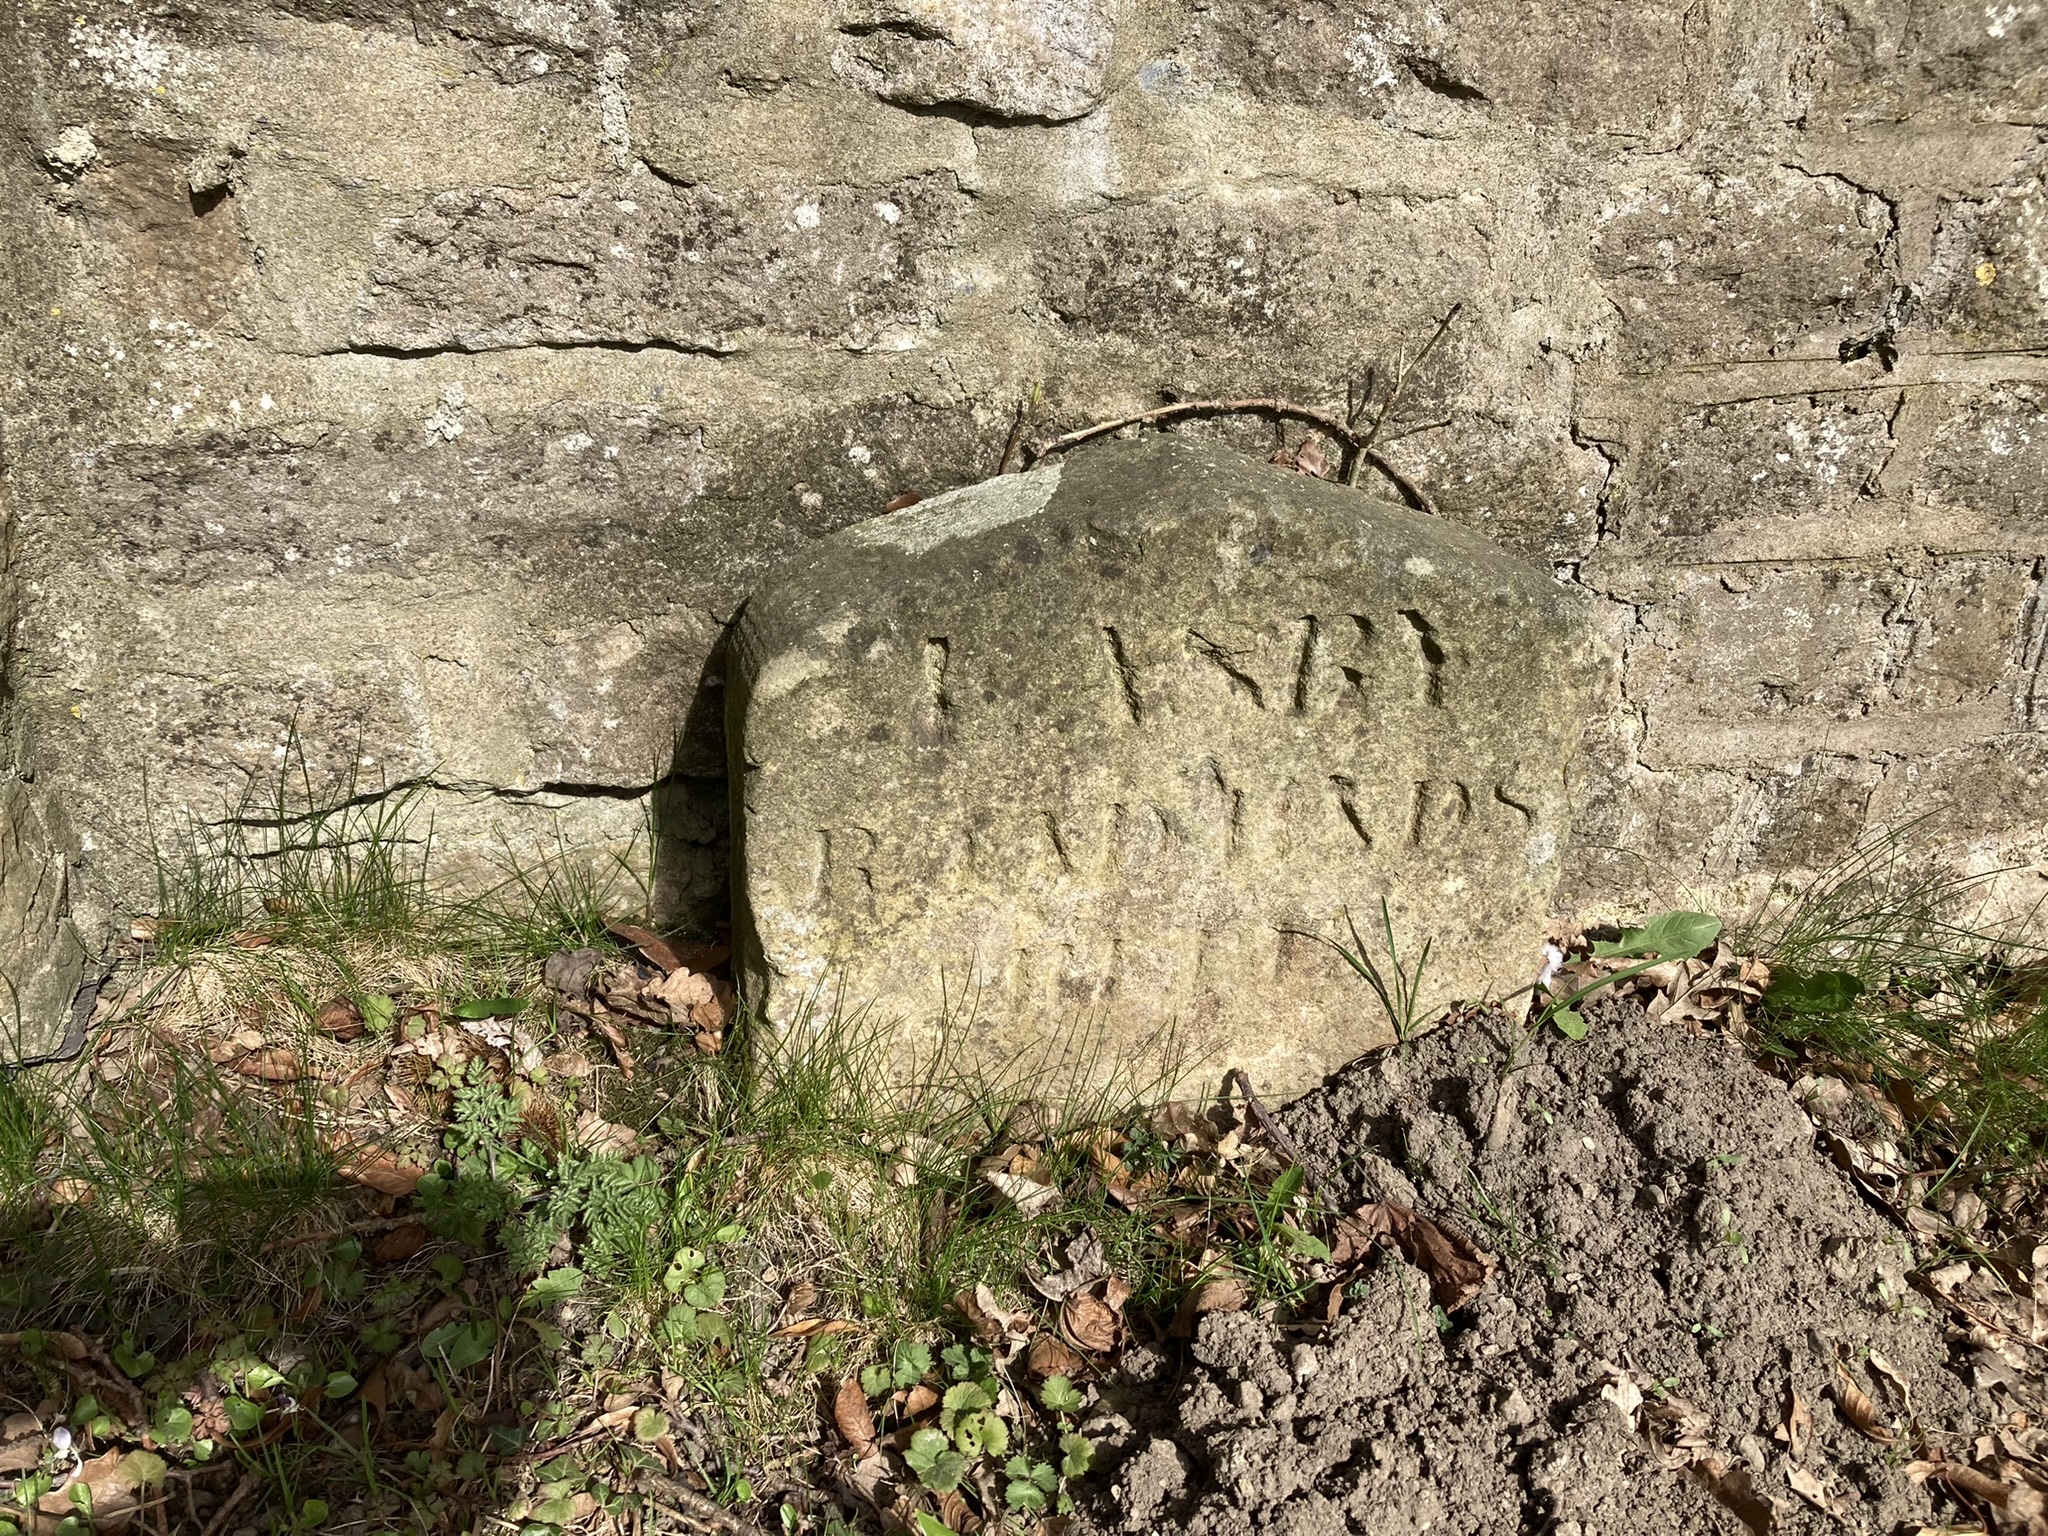 Easby Road Ends Here says this late 18th Century stone on the road between Scorton and Richmond. It is beside the Scots Dike, which is a boundary dating from the 6th Century